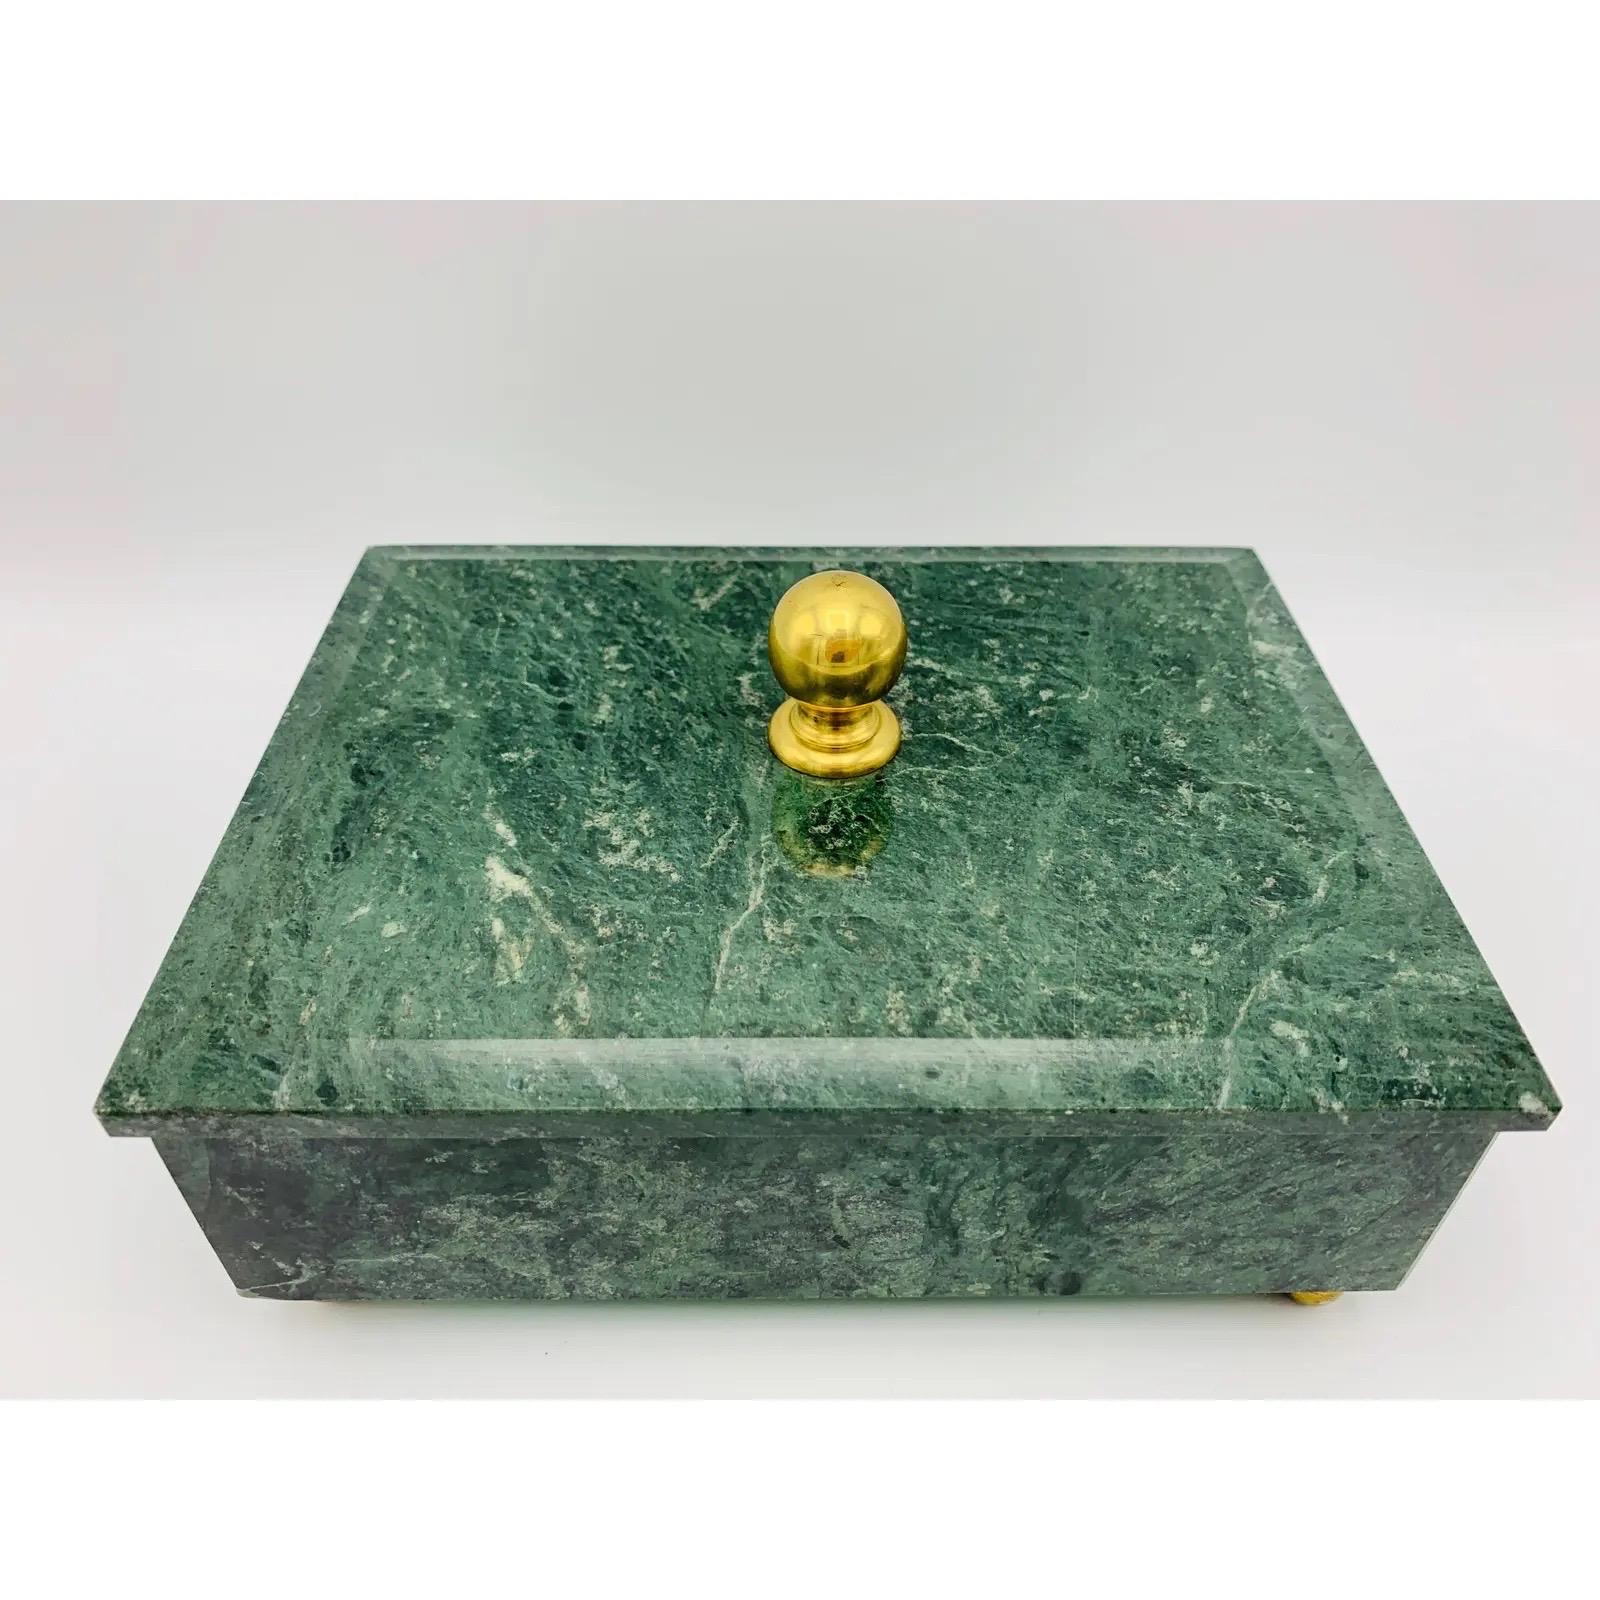 1960s Modern Italian Marble and Brass Footed Box For Sale 2